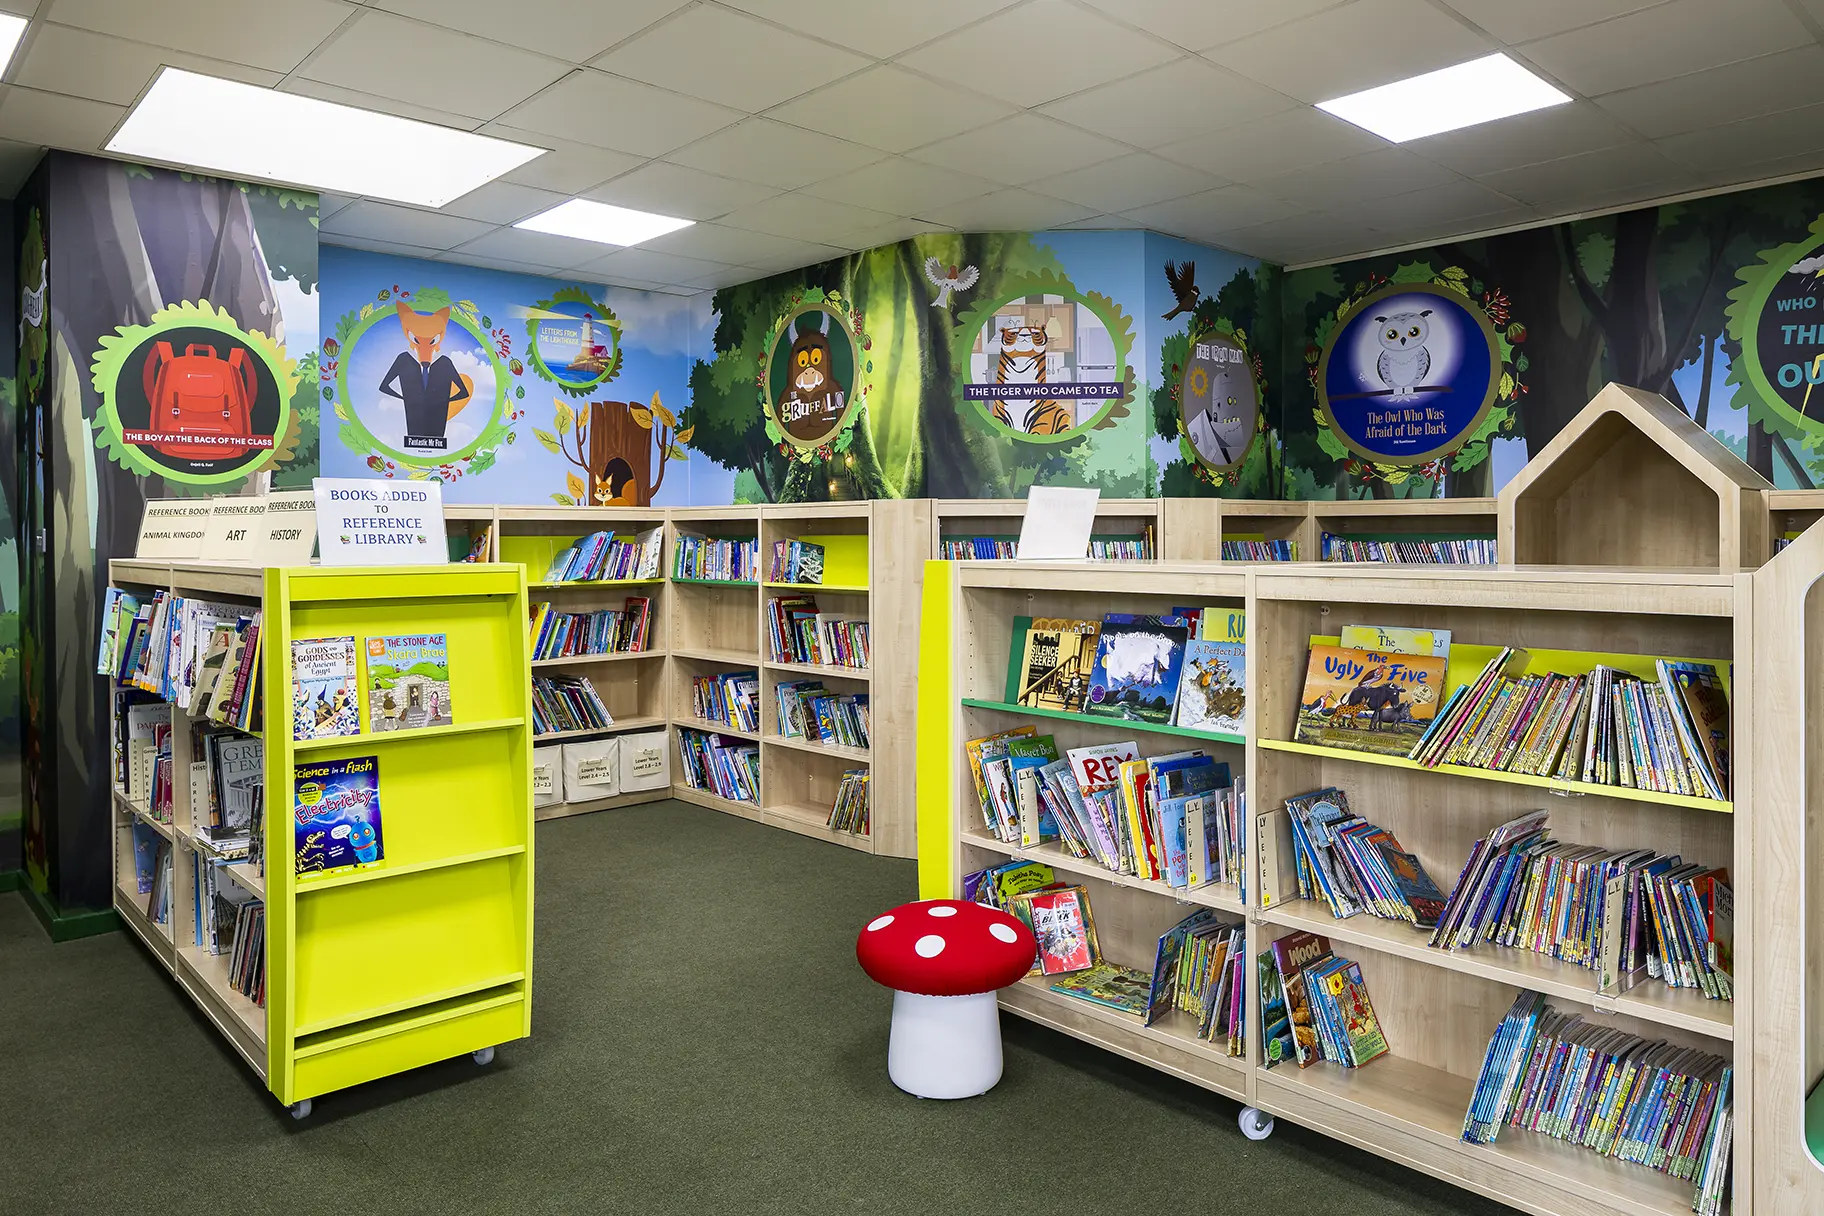 Highwood primary school library wall art